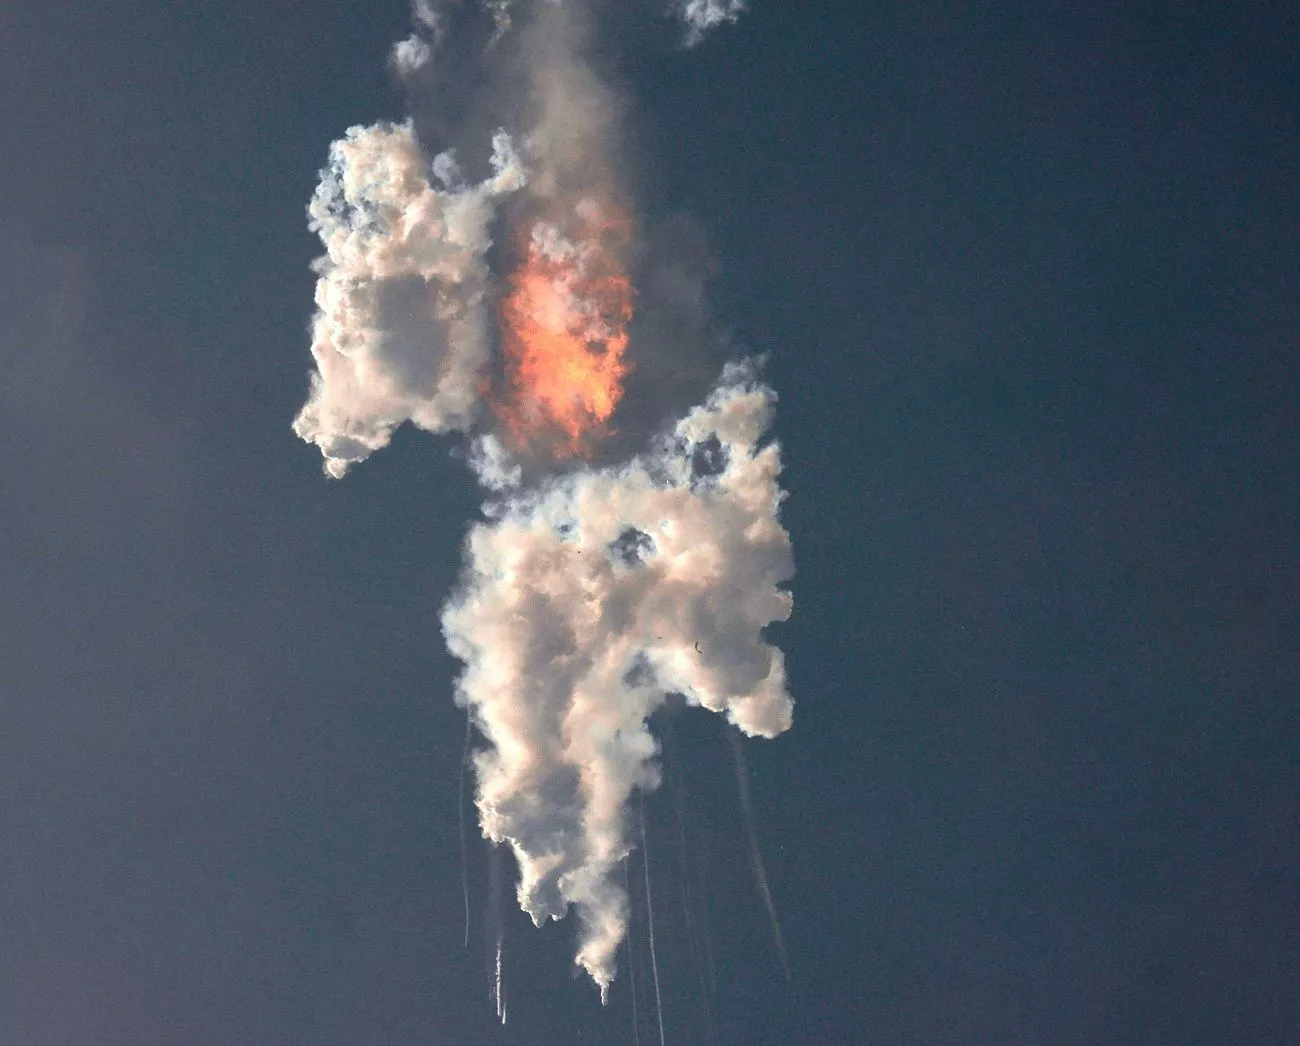 Know the Main Reasons Behind SpaceX Starship Explosion